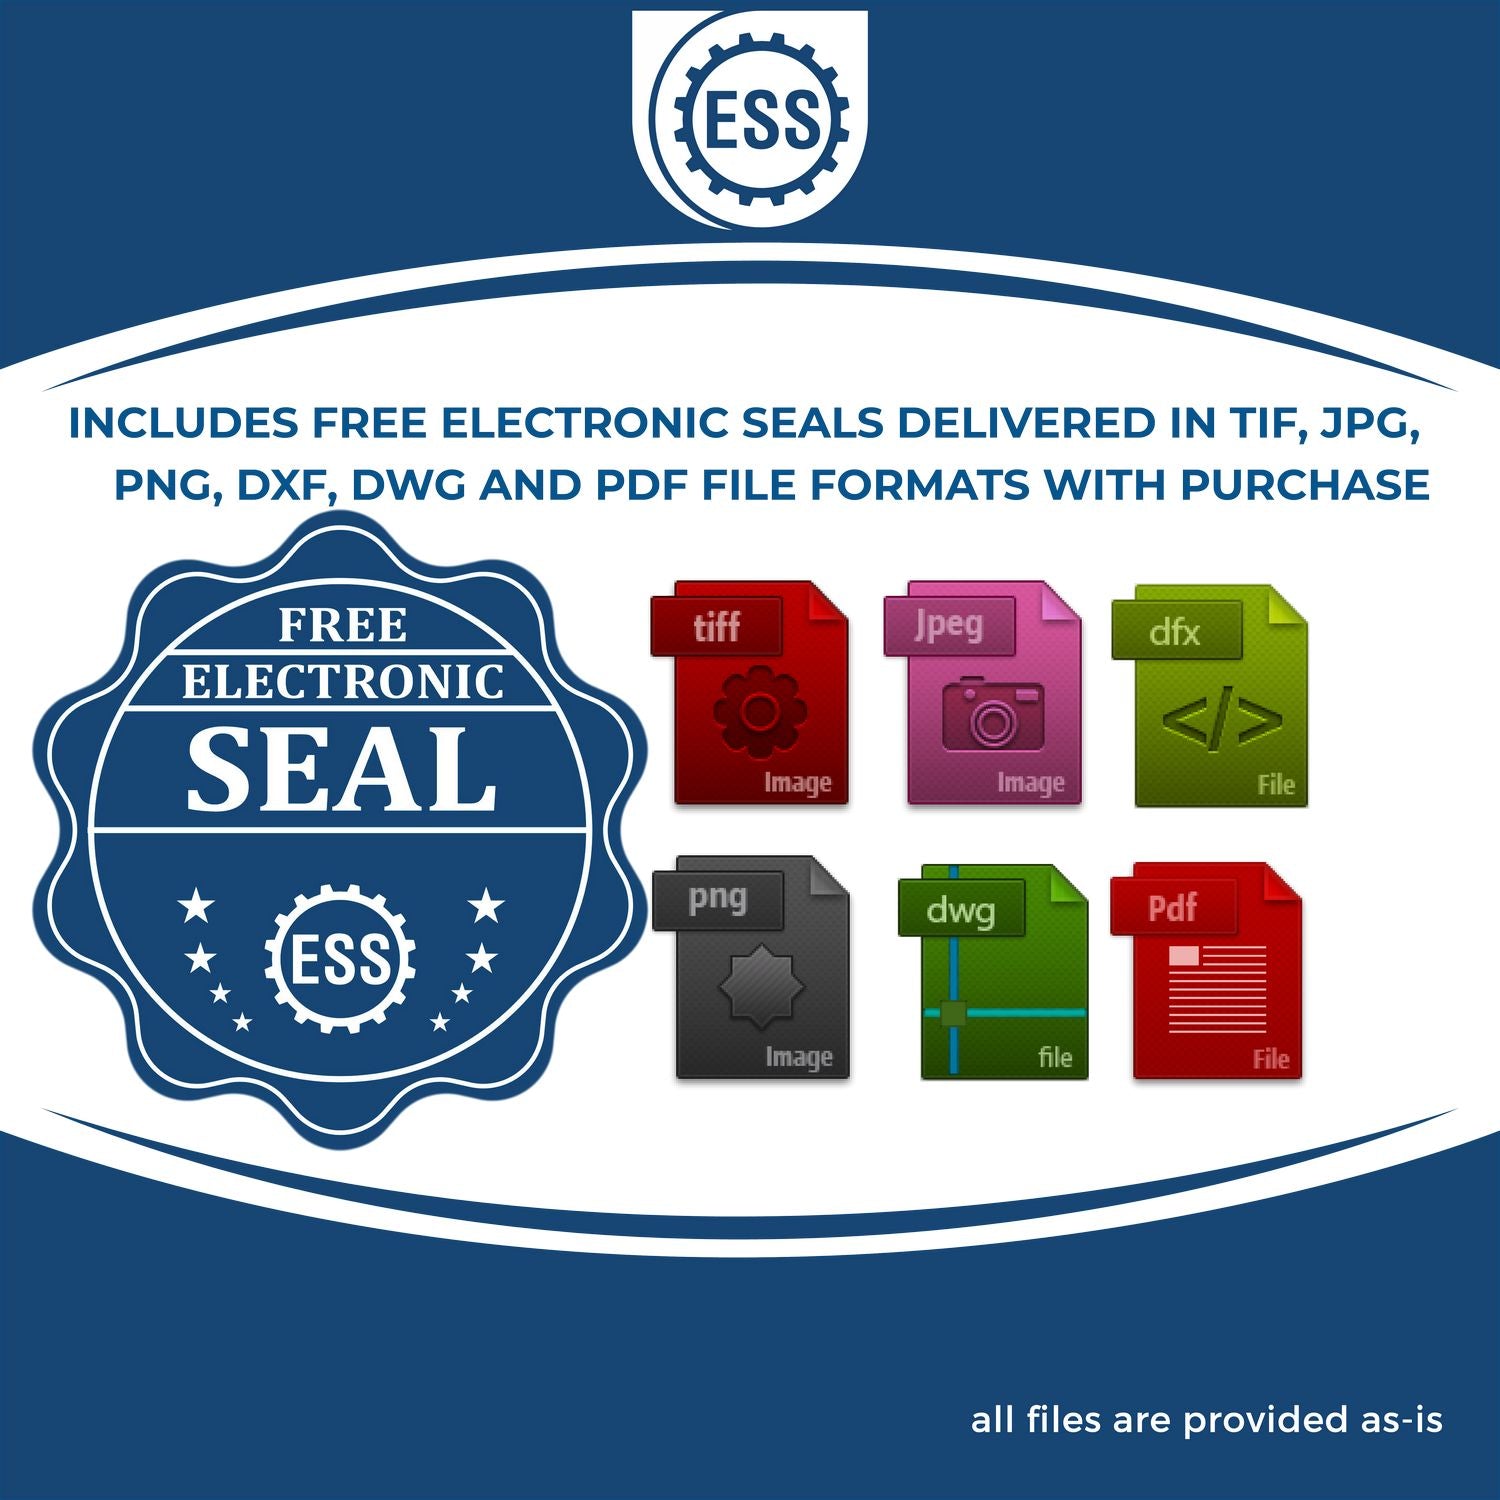 An infographic for the free electronic seal for the Self-Inking Oklahoma PE Stamp illustrating the different file type icons such as DXF, DWG, TIF, JPG and PNG.